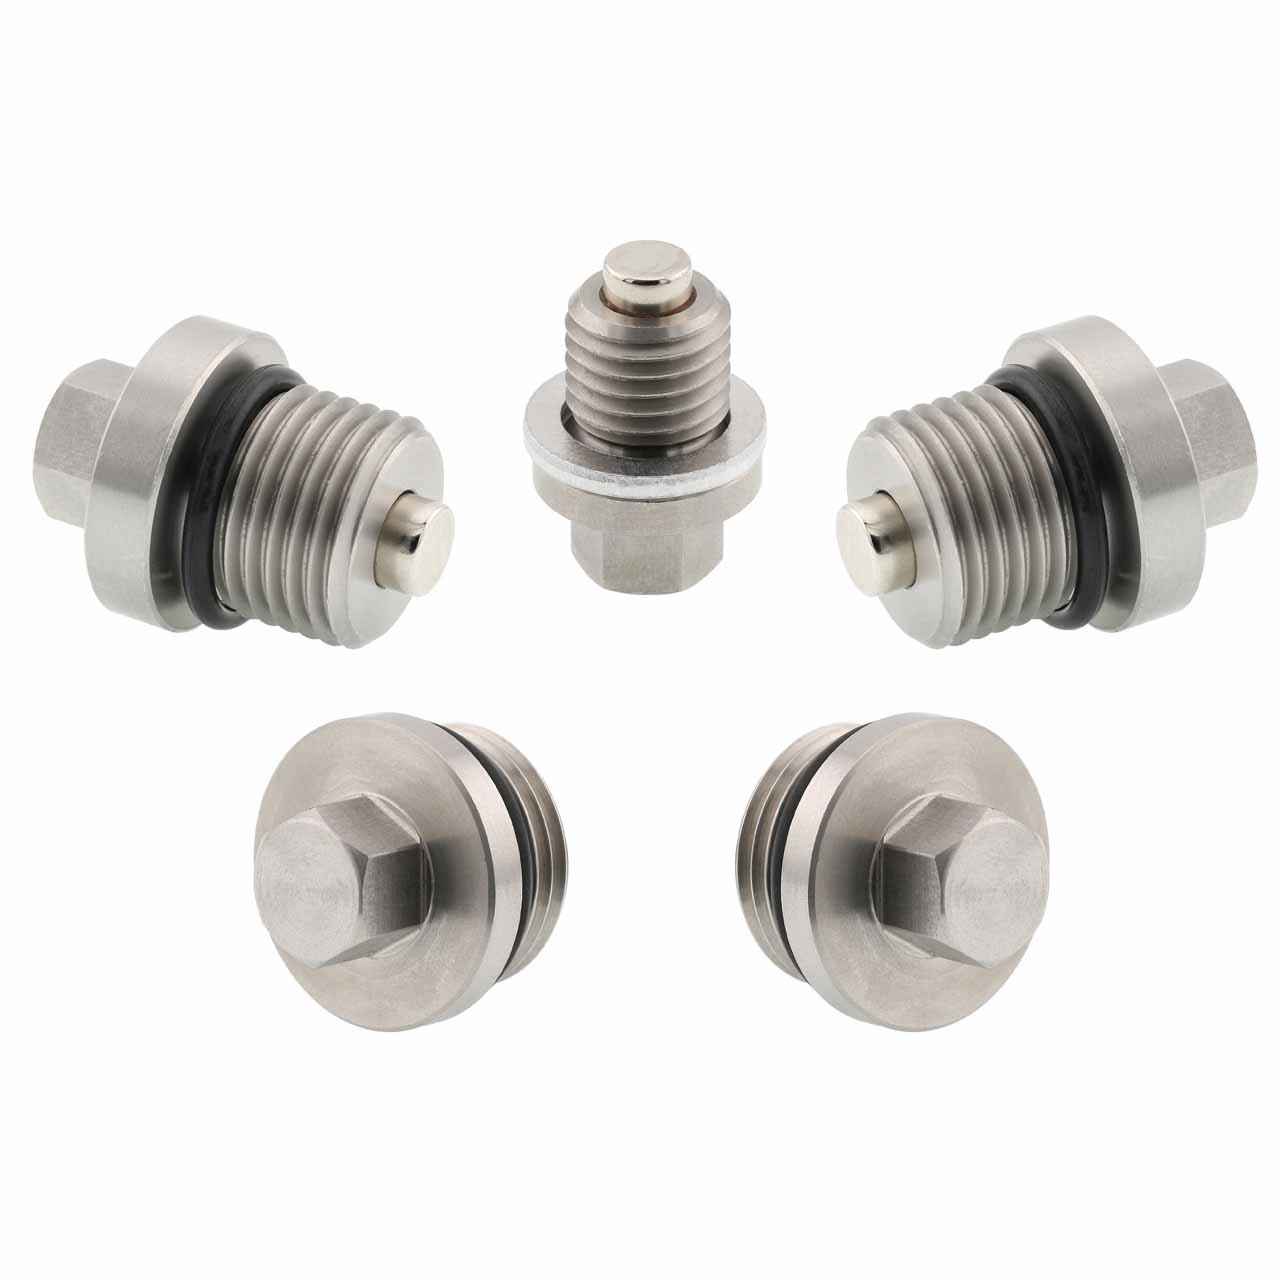 Polaris RZR 900 EPS Magnetic Oil Drain Plug Kit - 2014-2019 - Engine, Transmission, Differential - Made In USA